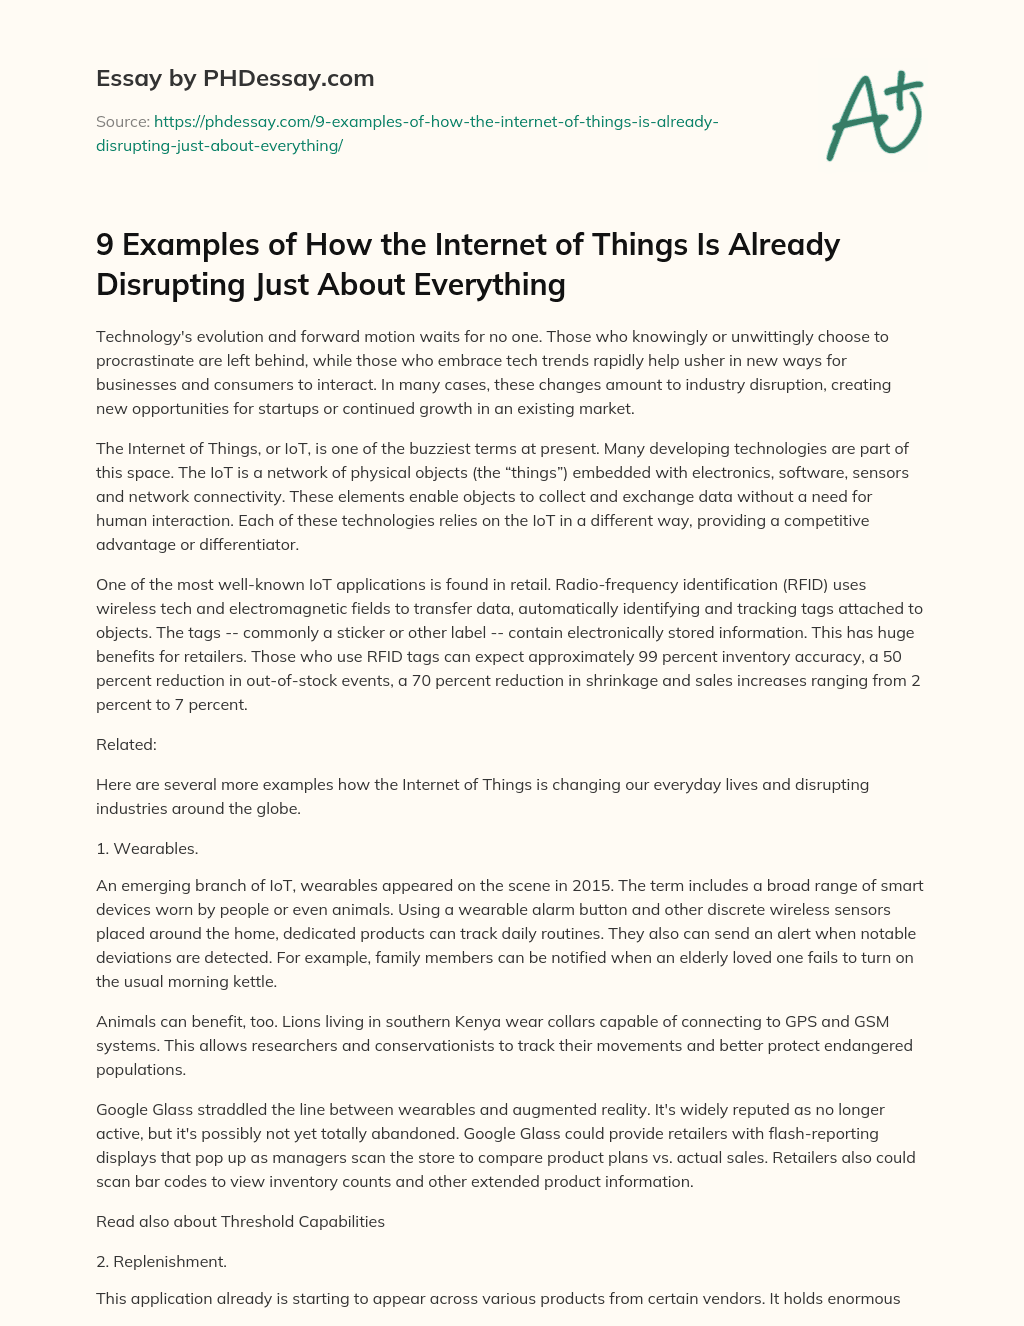 9 Examples of How the Internet of Things Is Already Disrupting Just About Everything essay